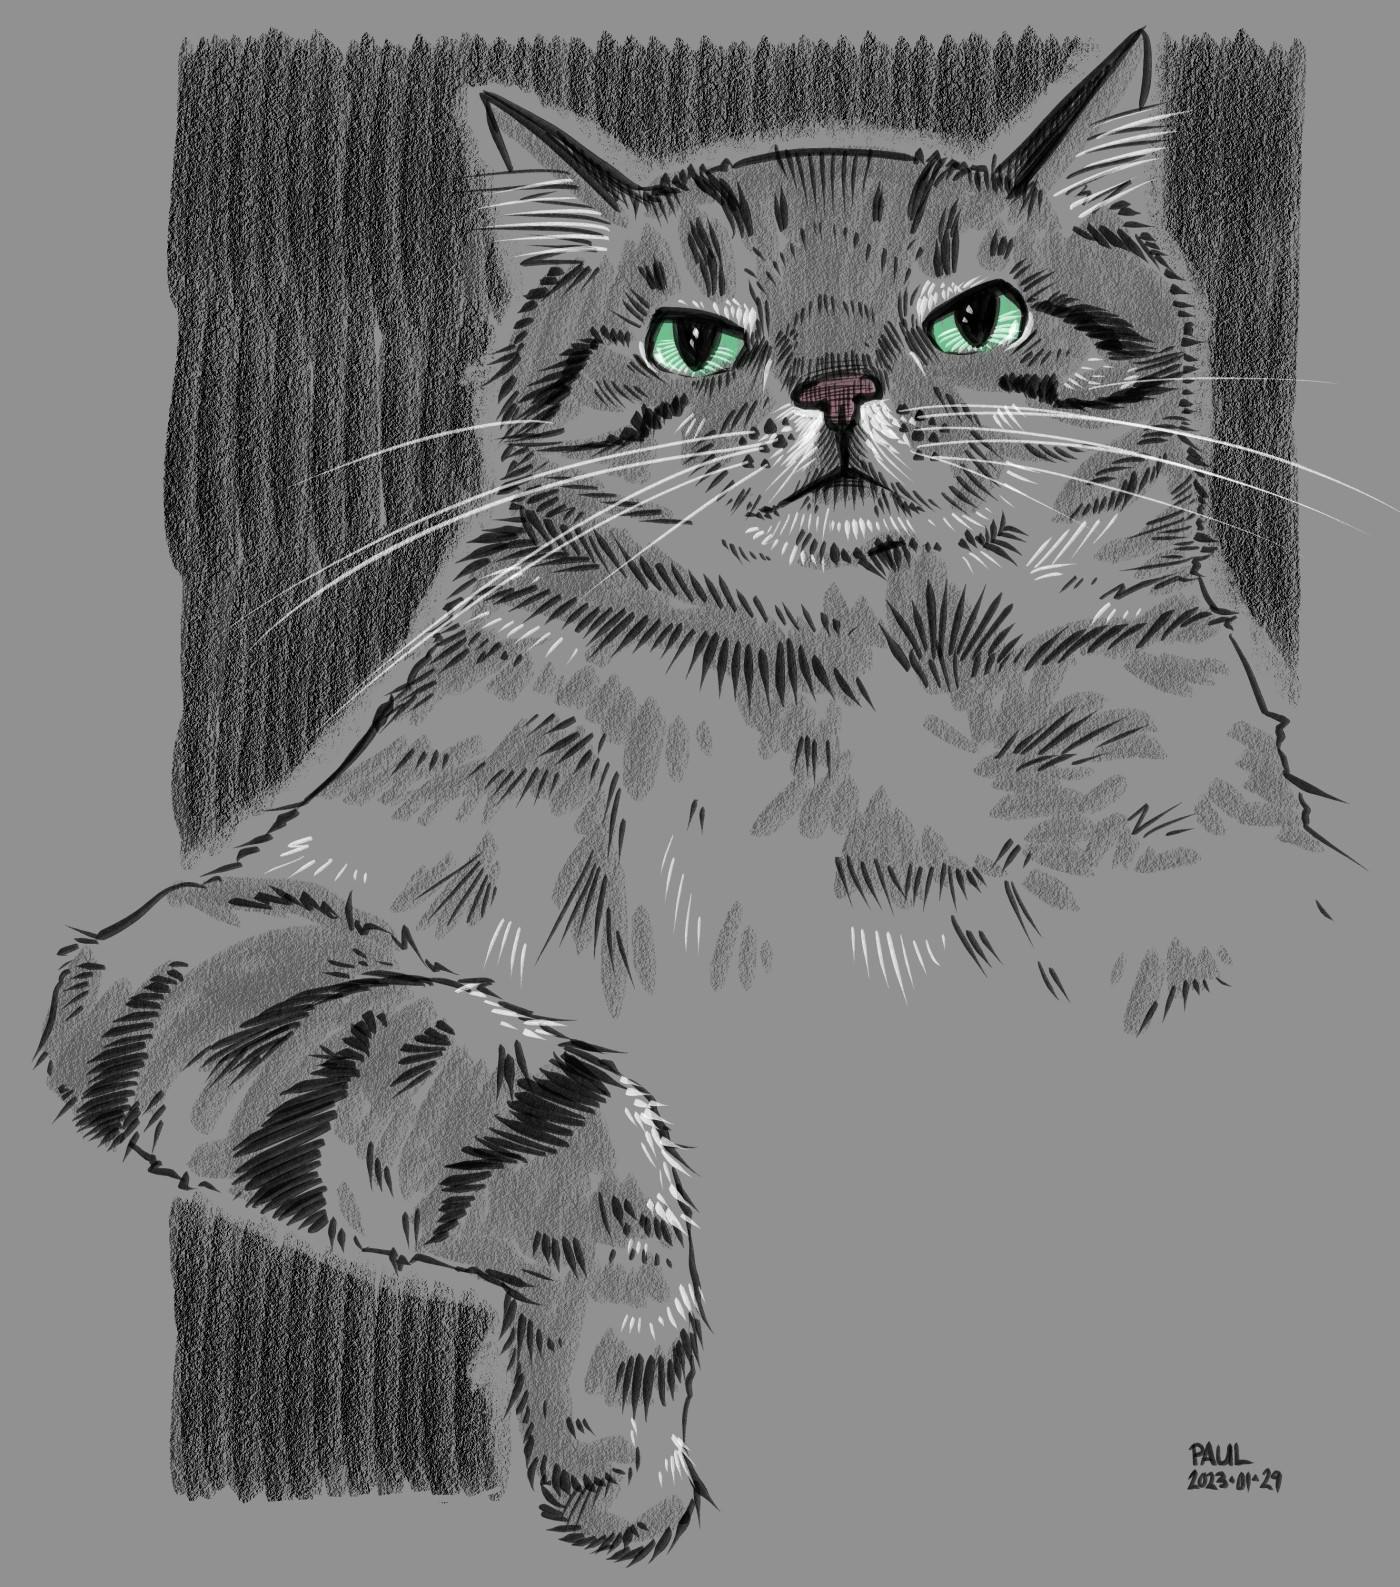 A digital drawing emulating graphite of a wide-set cat leaning with its arm draped over an invisible object.